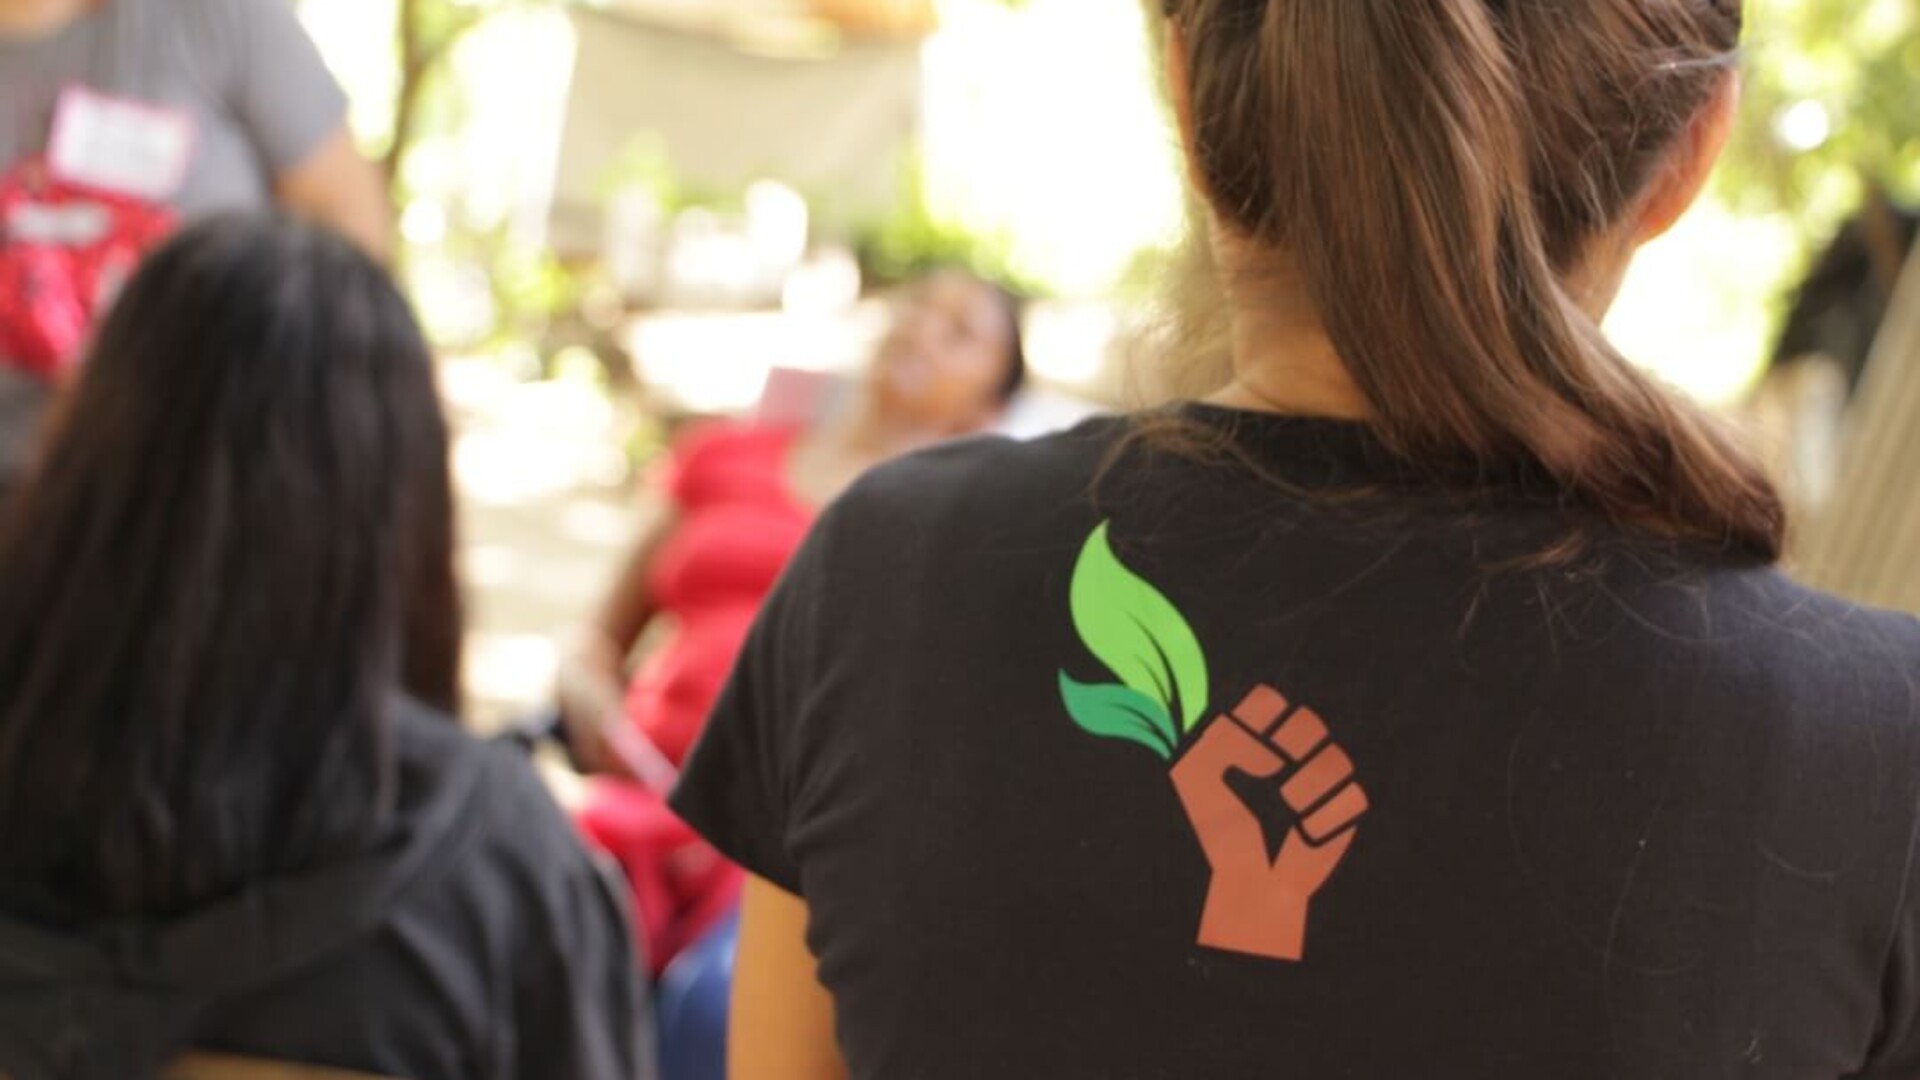 Woman facing away from camera wearing black tee-shirt with a graphic representing a fist clutching green leaves